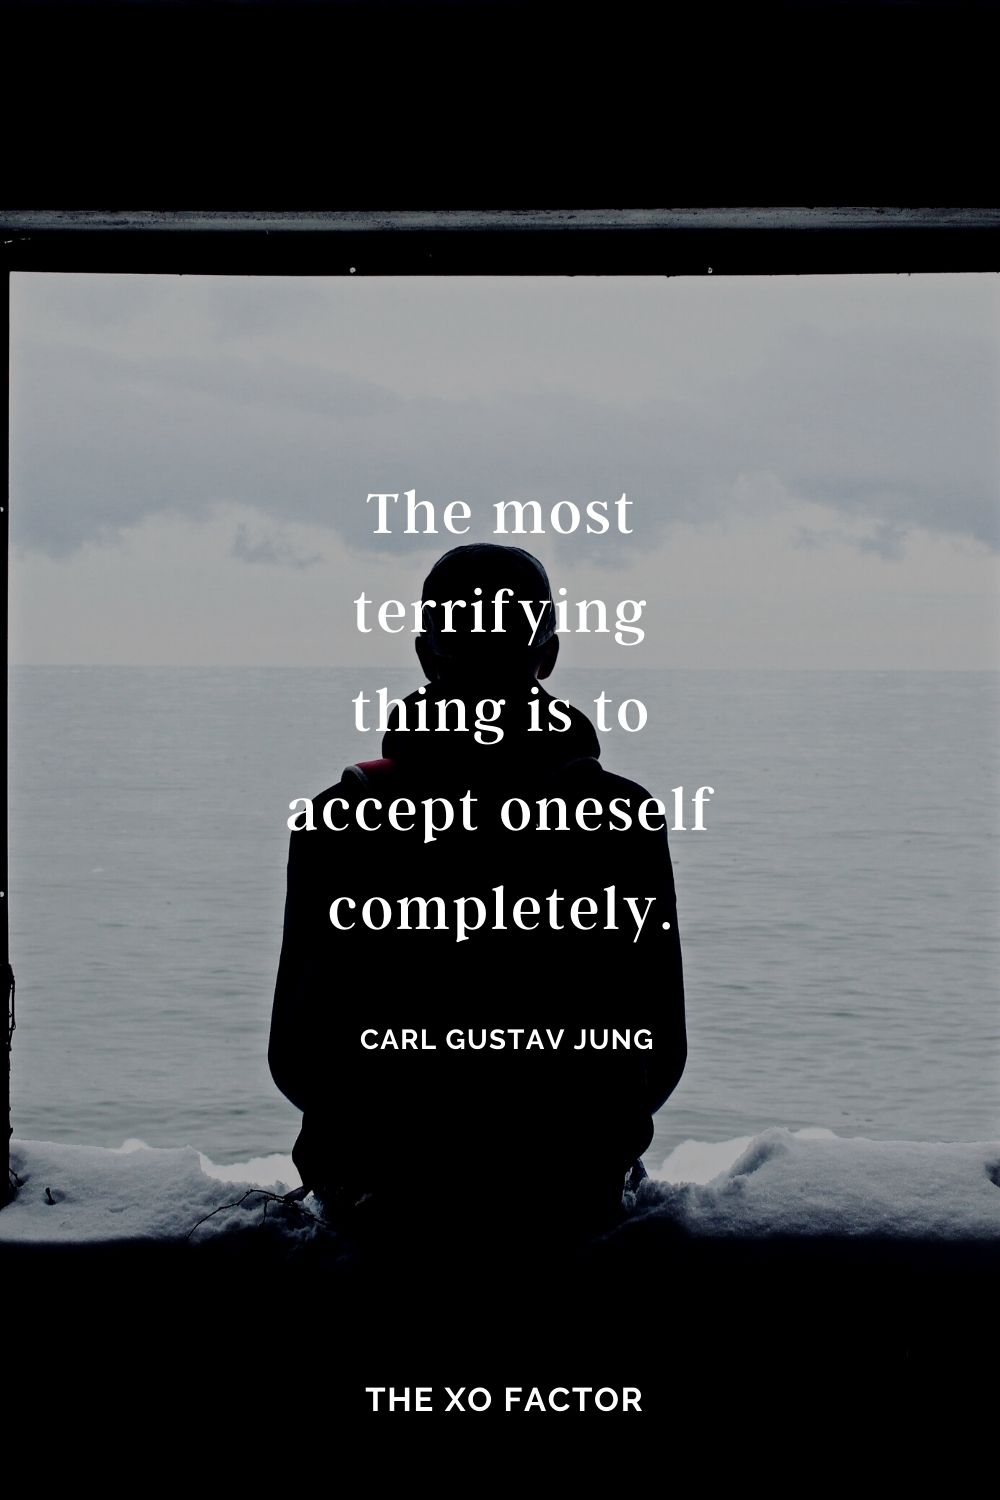 The most terrifying thing is to accept oneself completely. Carl Gustav Jung